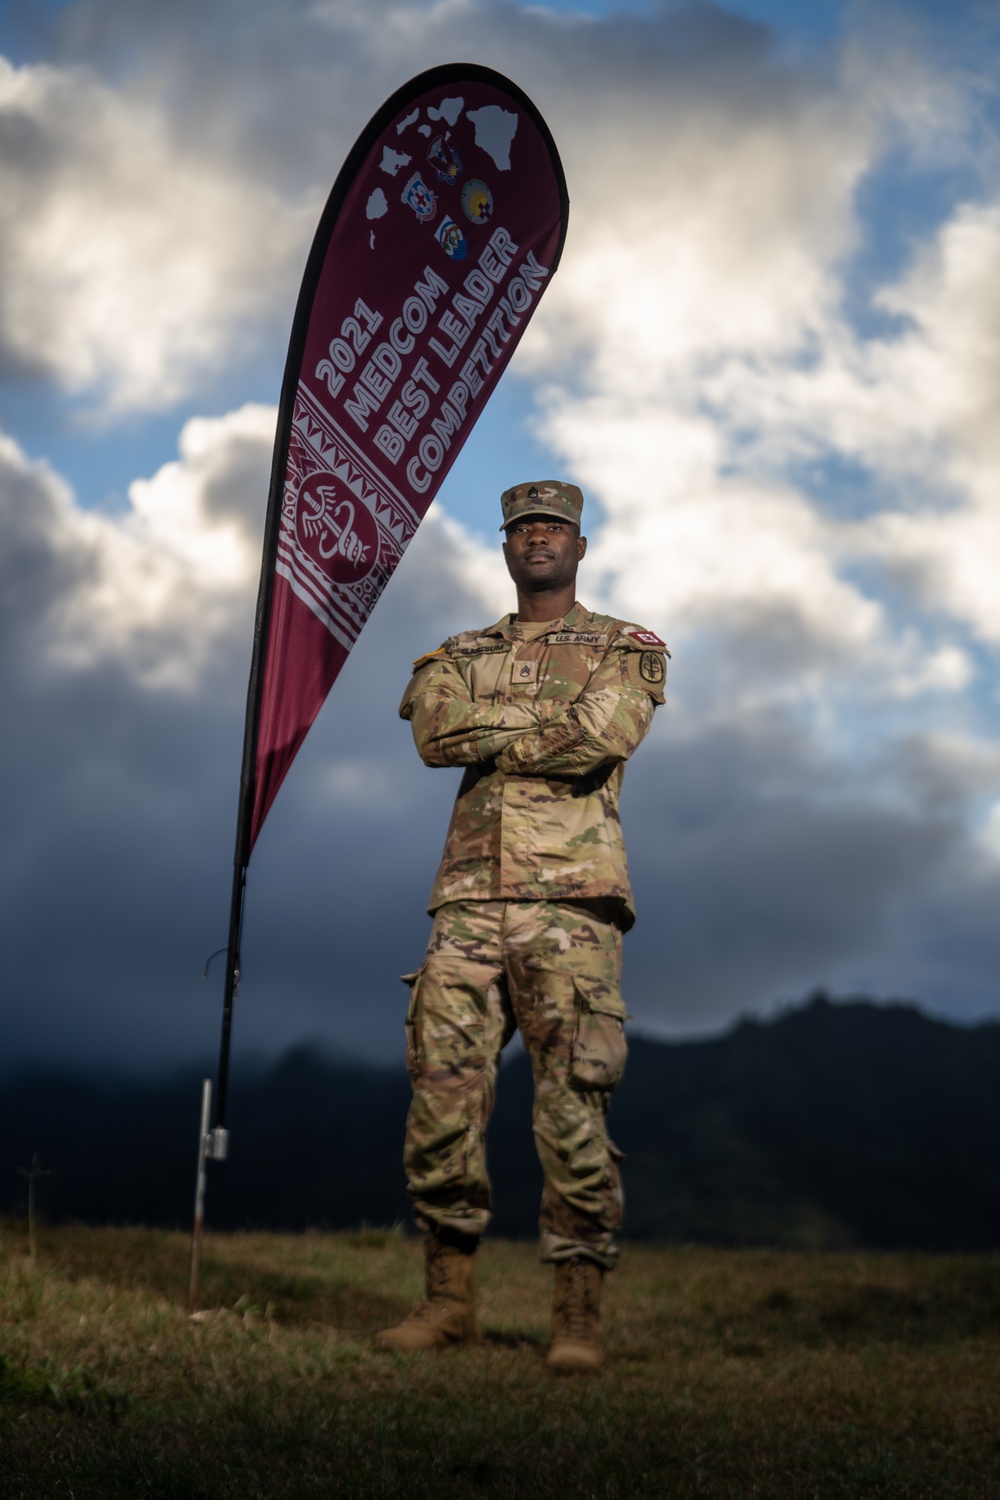 Staff Sgt. James Gabisum competes for 2021 Army Medicine Best Leader title